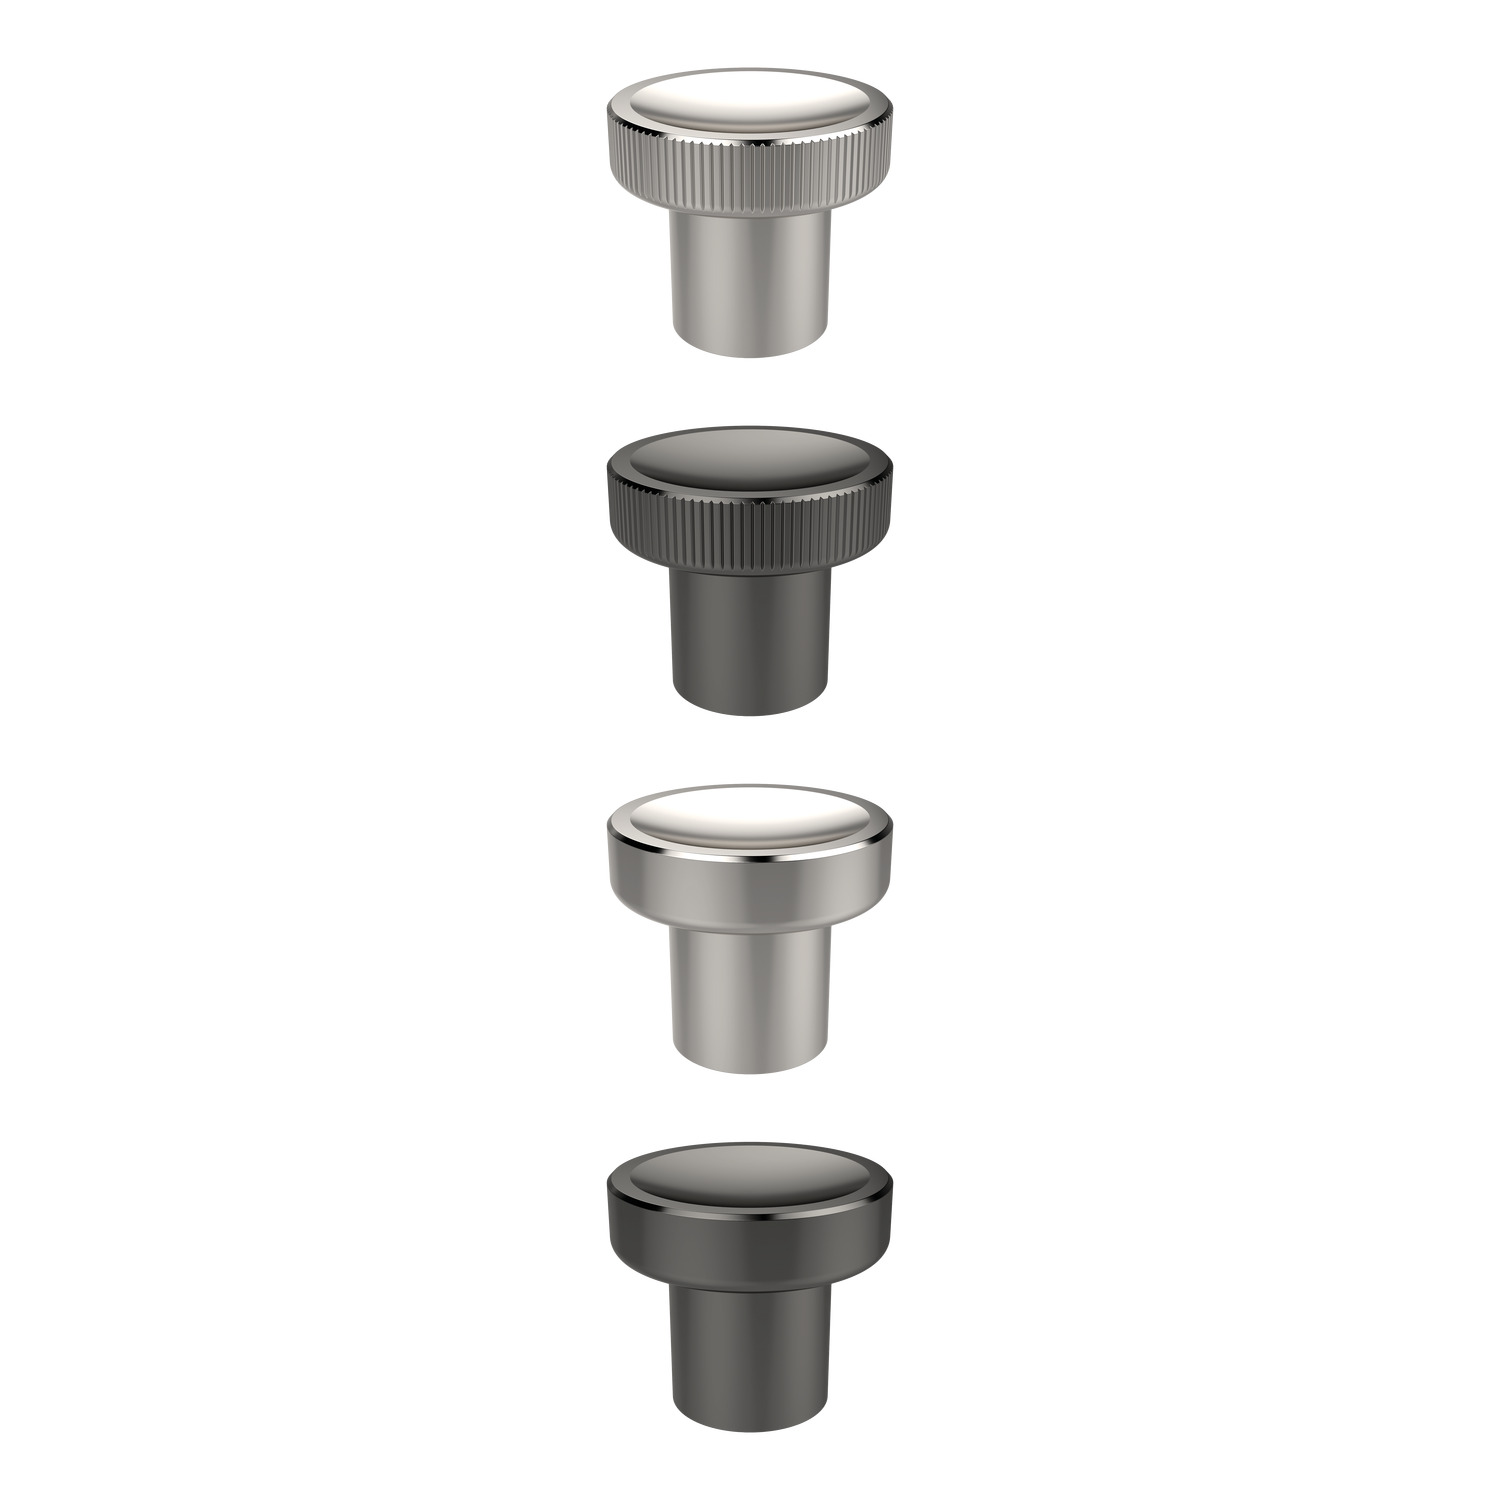 Product 37460, Thumb Knob steel or stainless steel / 